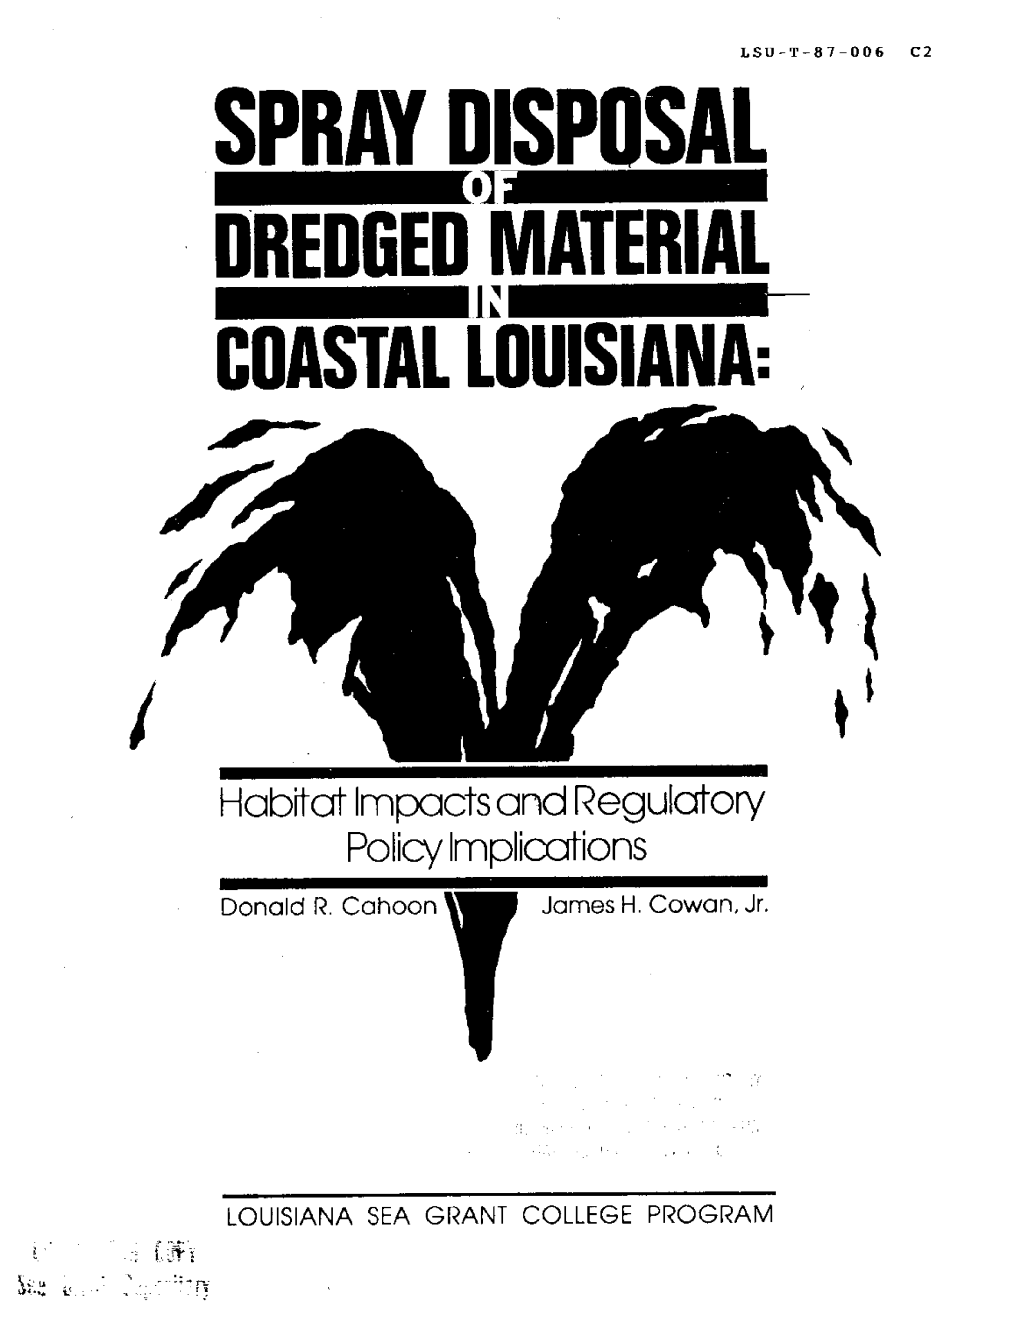 Spray Disposal of Dredged Material in Louisiana